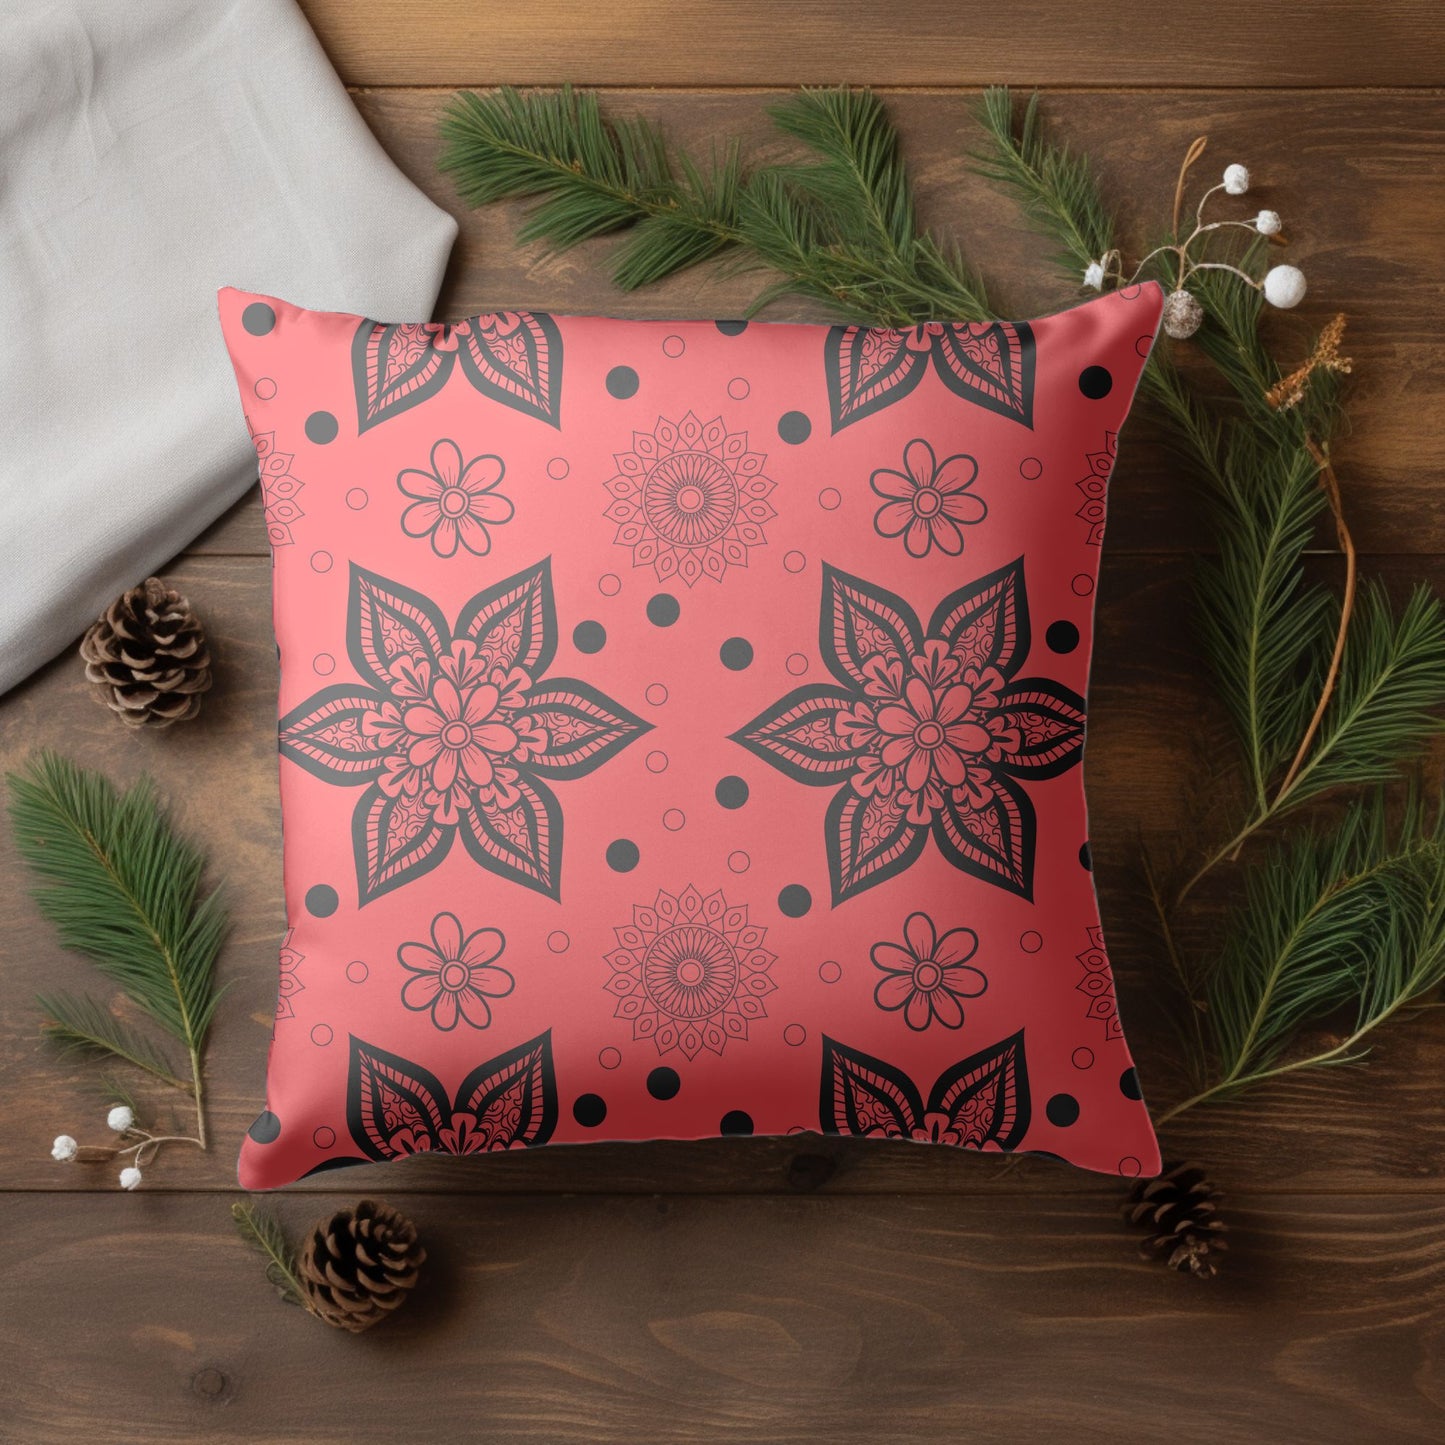 Elegant Red Christmas Pillow with Gold Accents